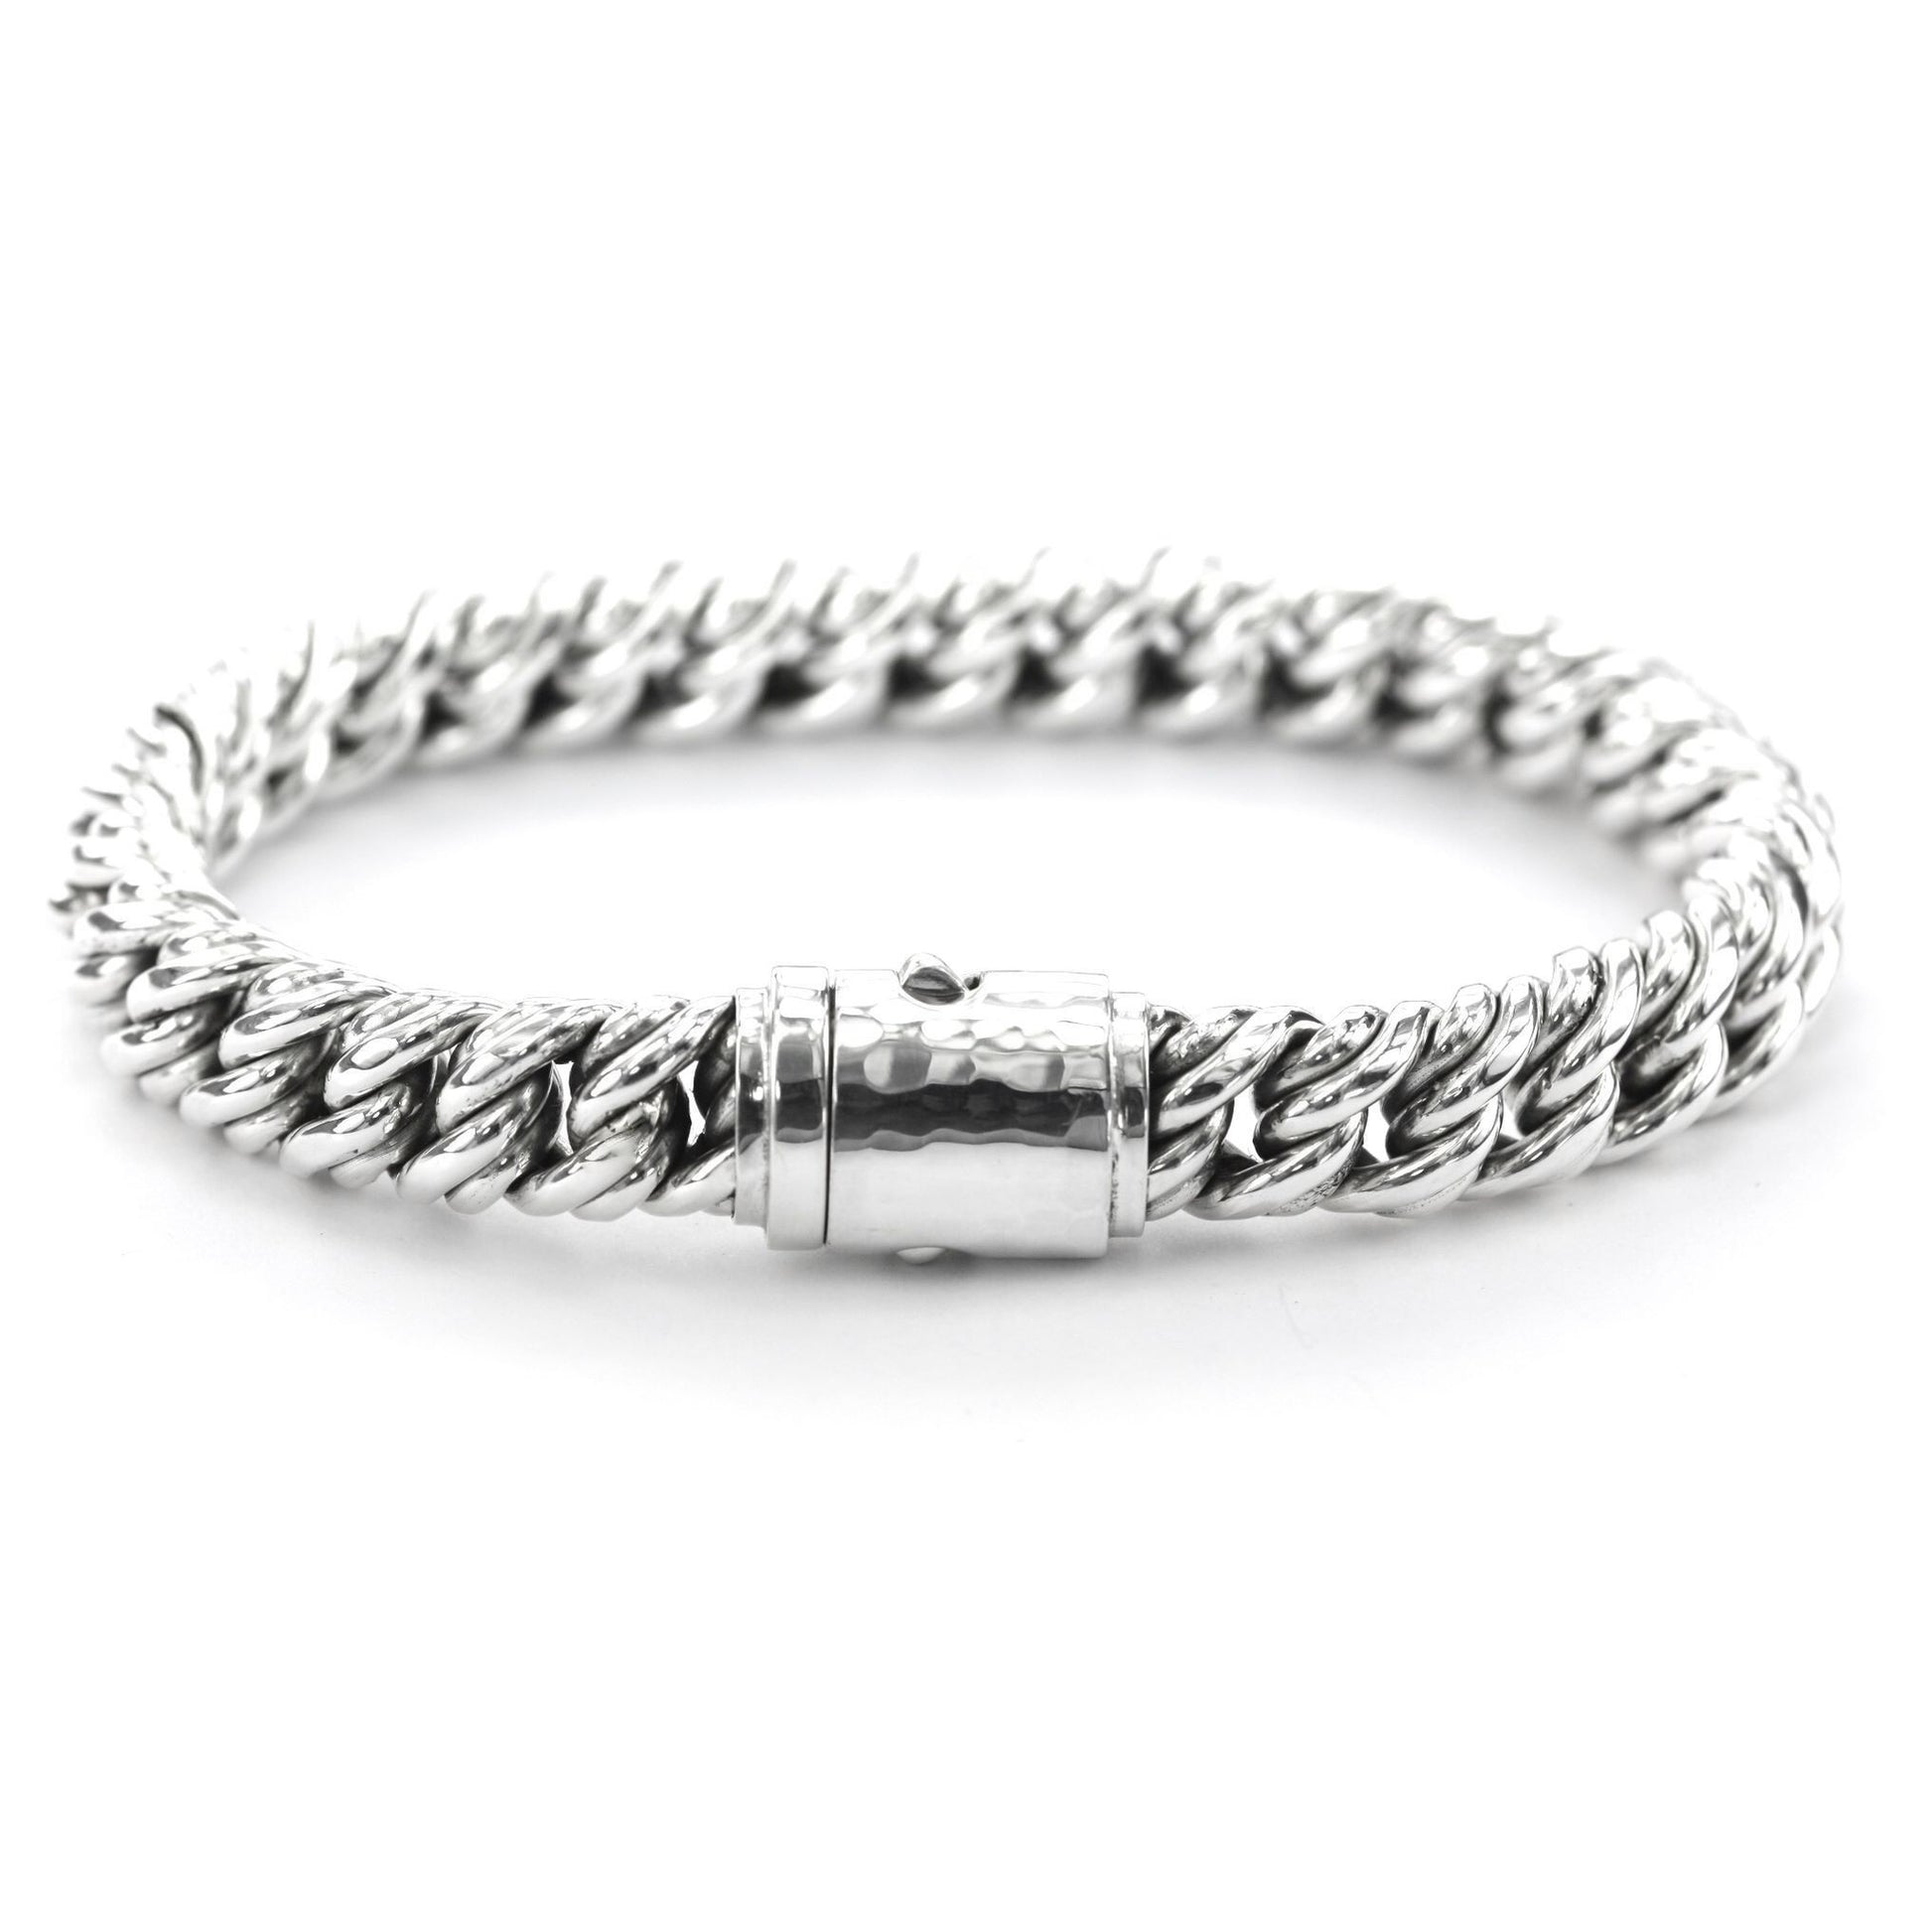 Heavy silver chain bracelet eight inches long with barrel clasp.